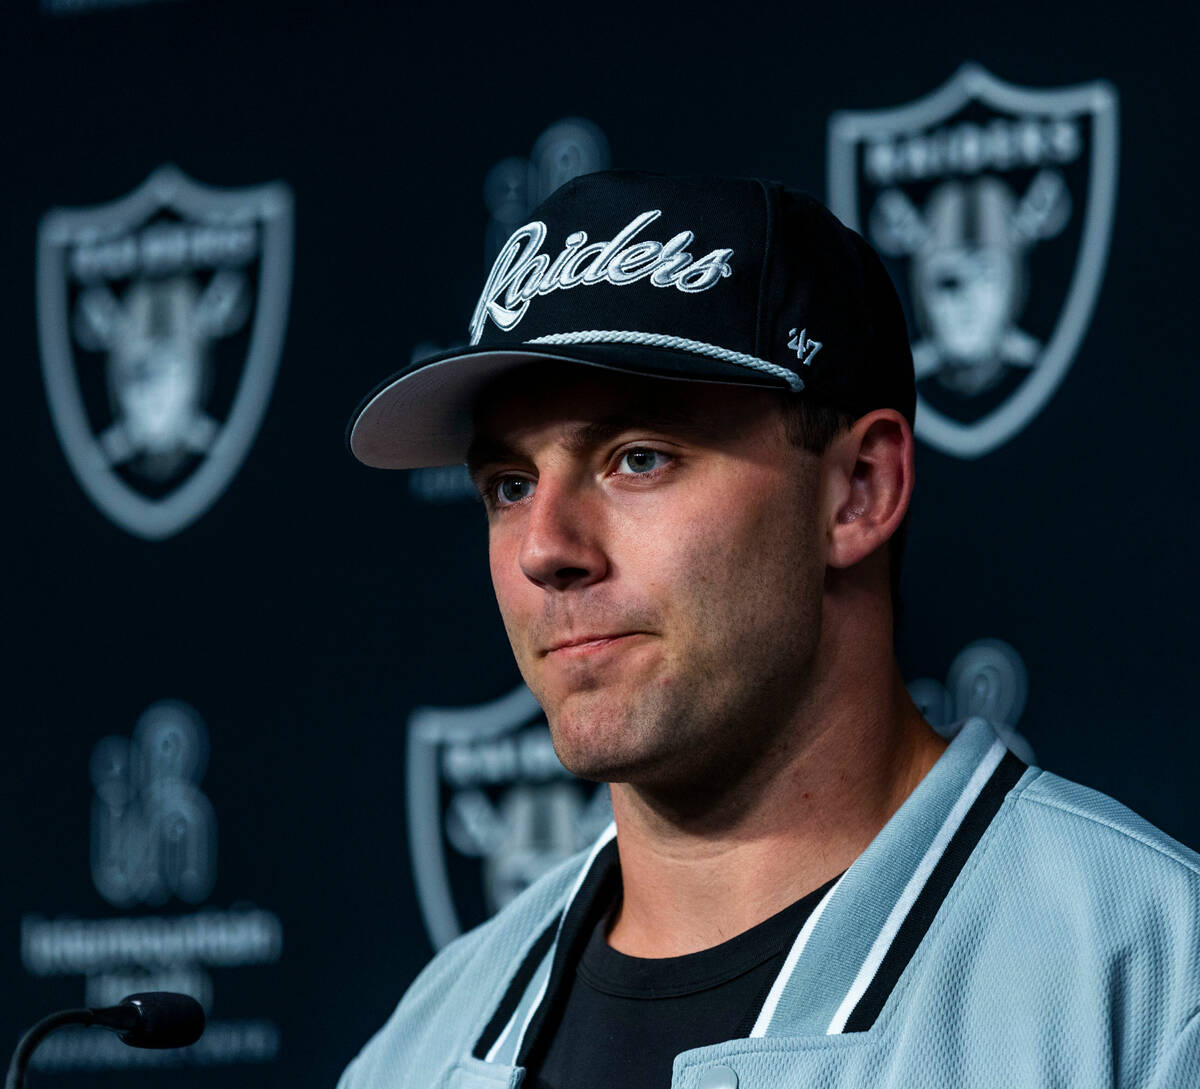 Raiders first round draft pick Brock Bowers considers a question as he speaks during a press co ...